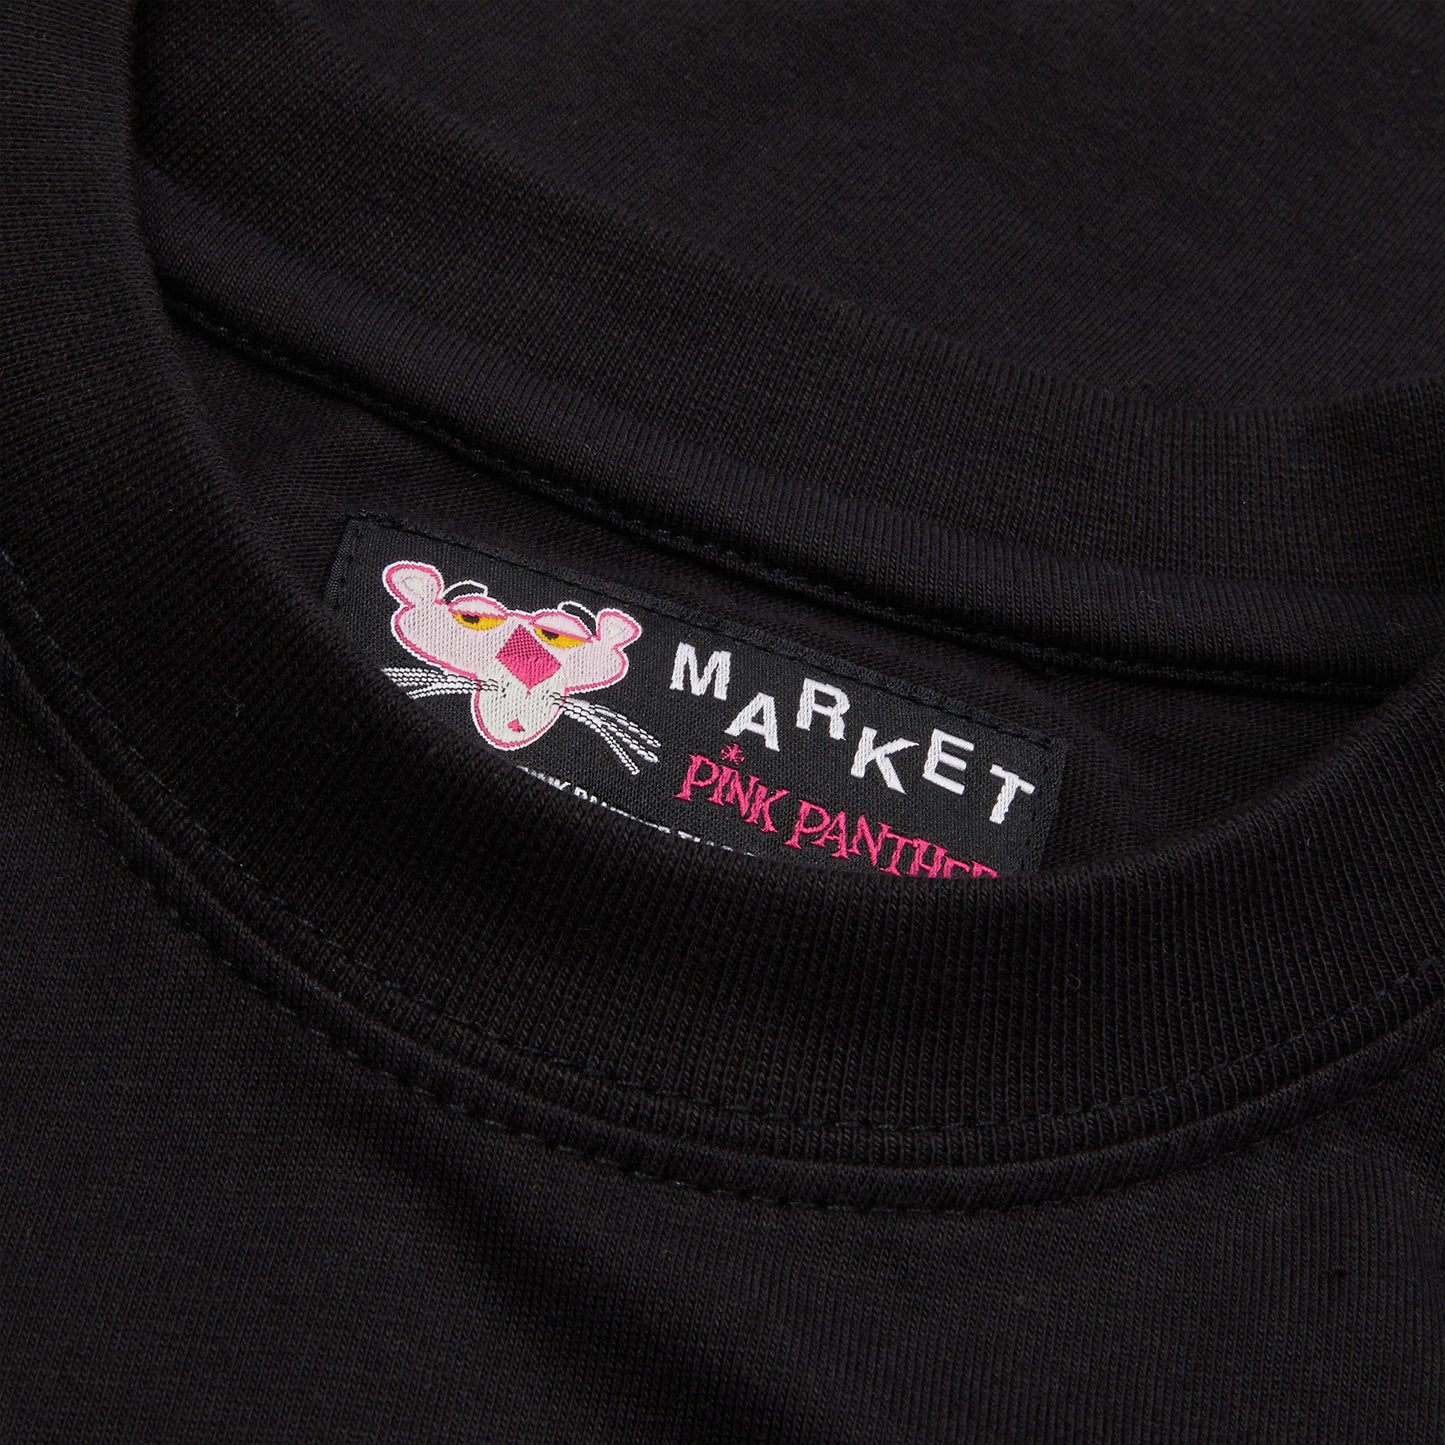 Market Pink Panther Call My Lawyer (Black)